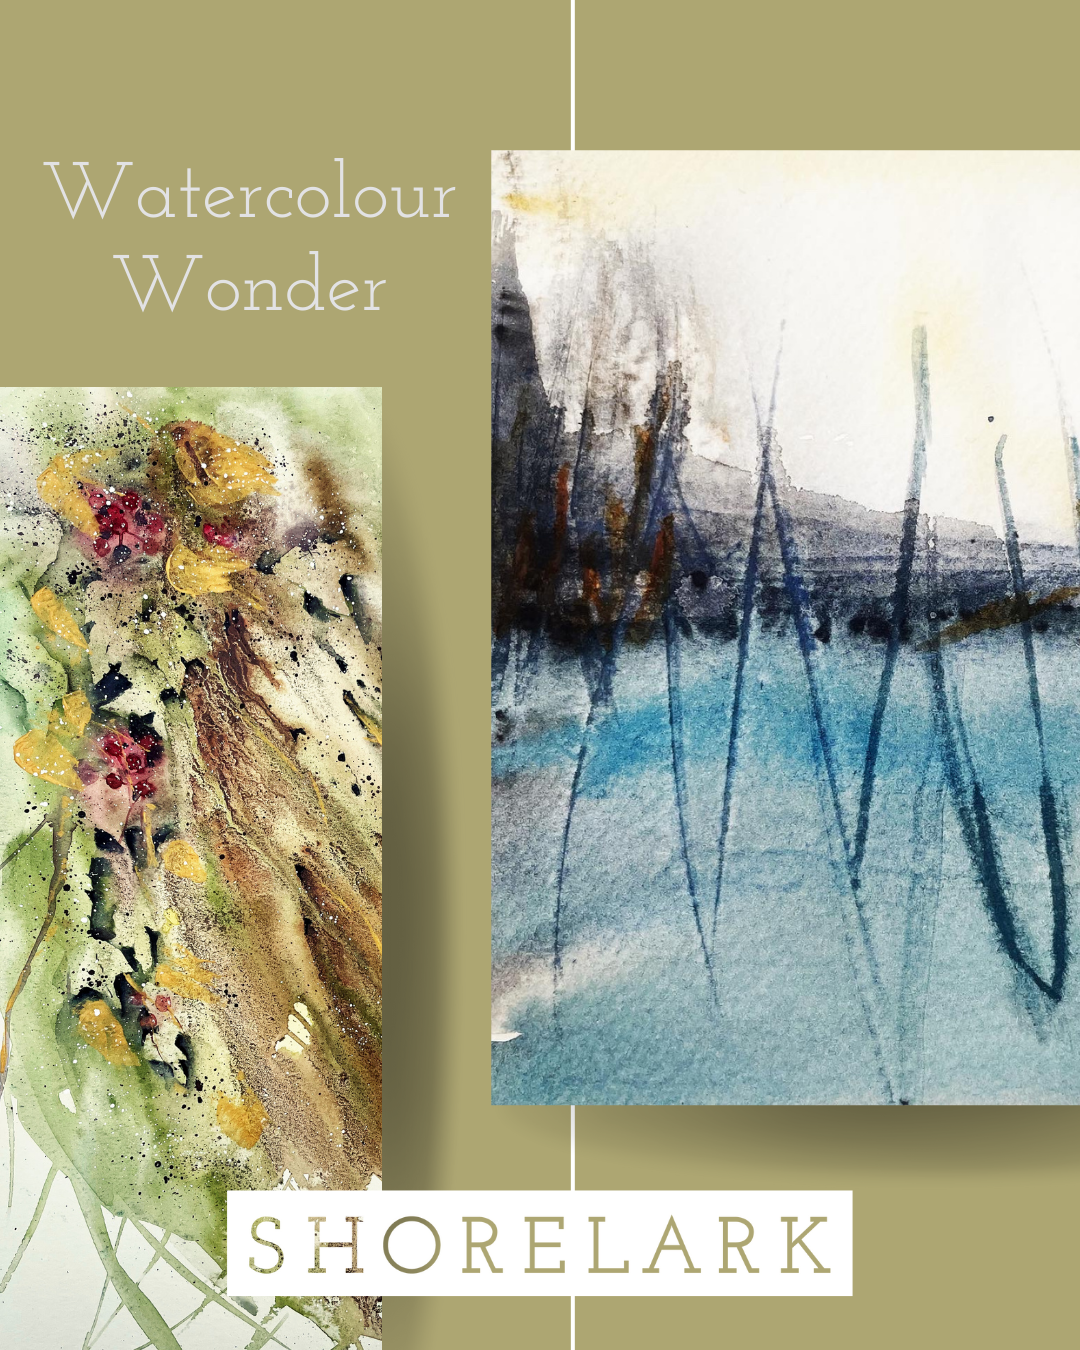 JUNE (22nd) - Watercolour Wonder - Immersion Day (Beginner Intro Session) @THE COCKENZIE HUB